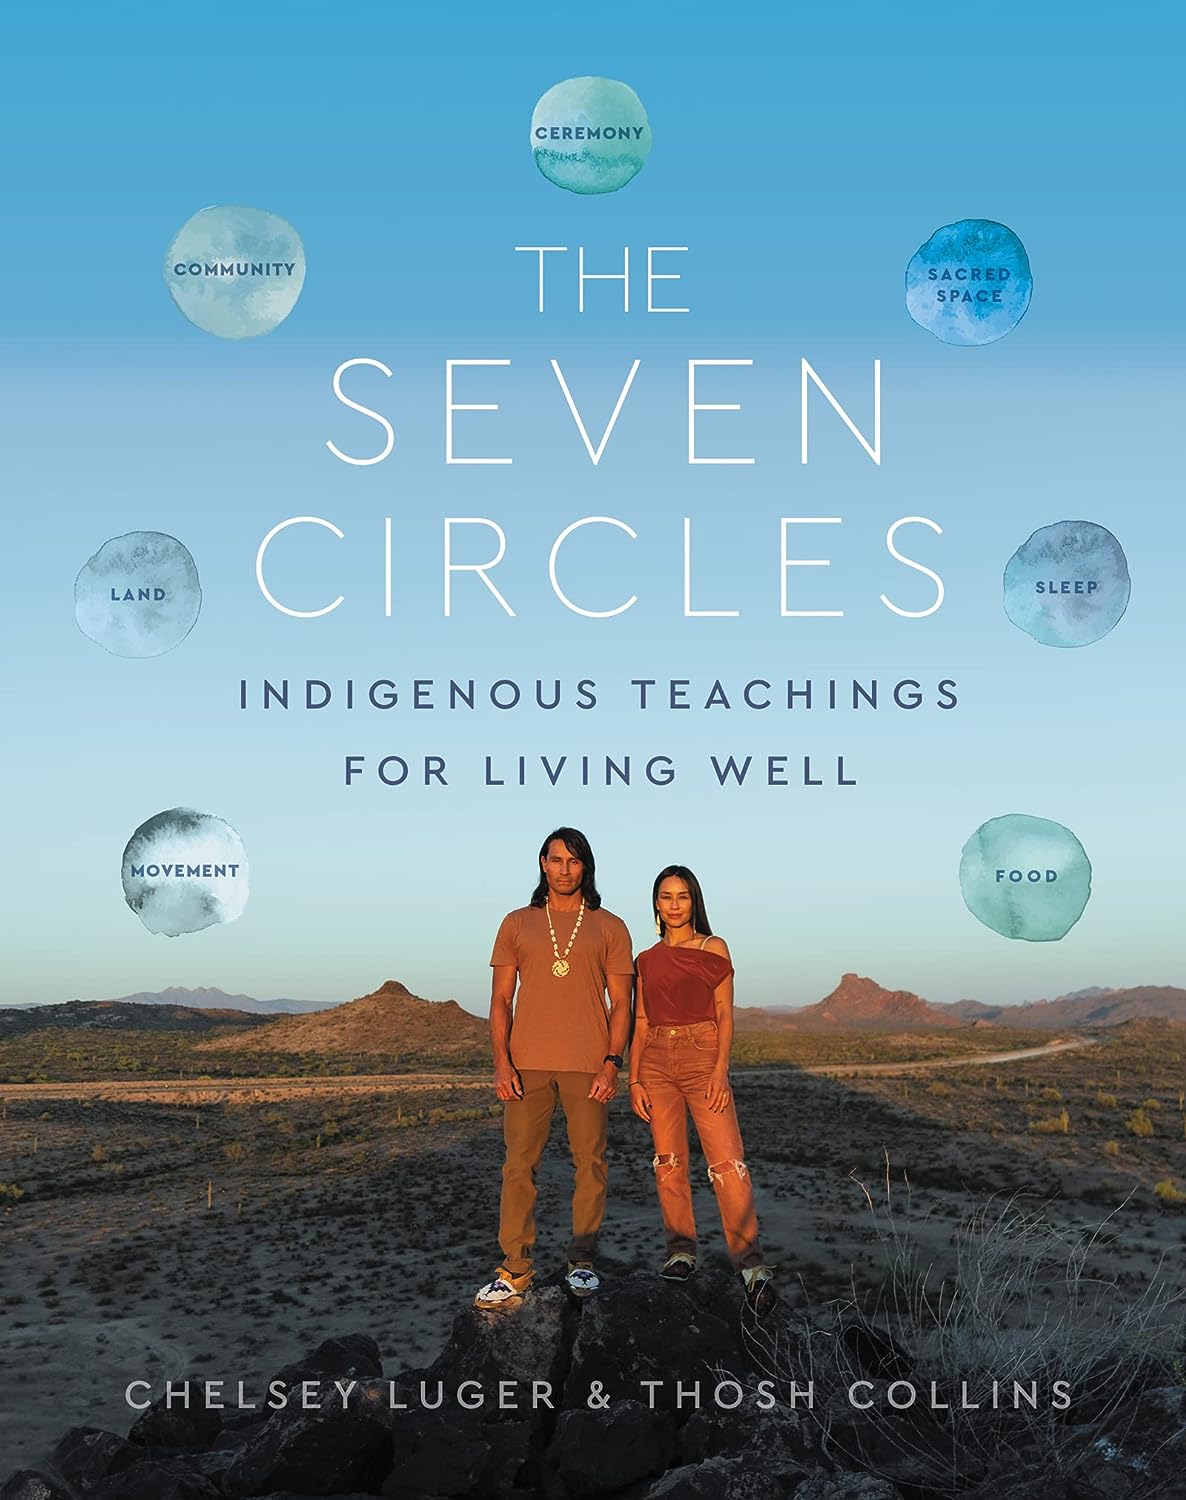  The seven circles : indigenous teachings for living well by Chelsey Luger and Thosh Collins.